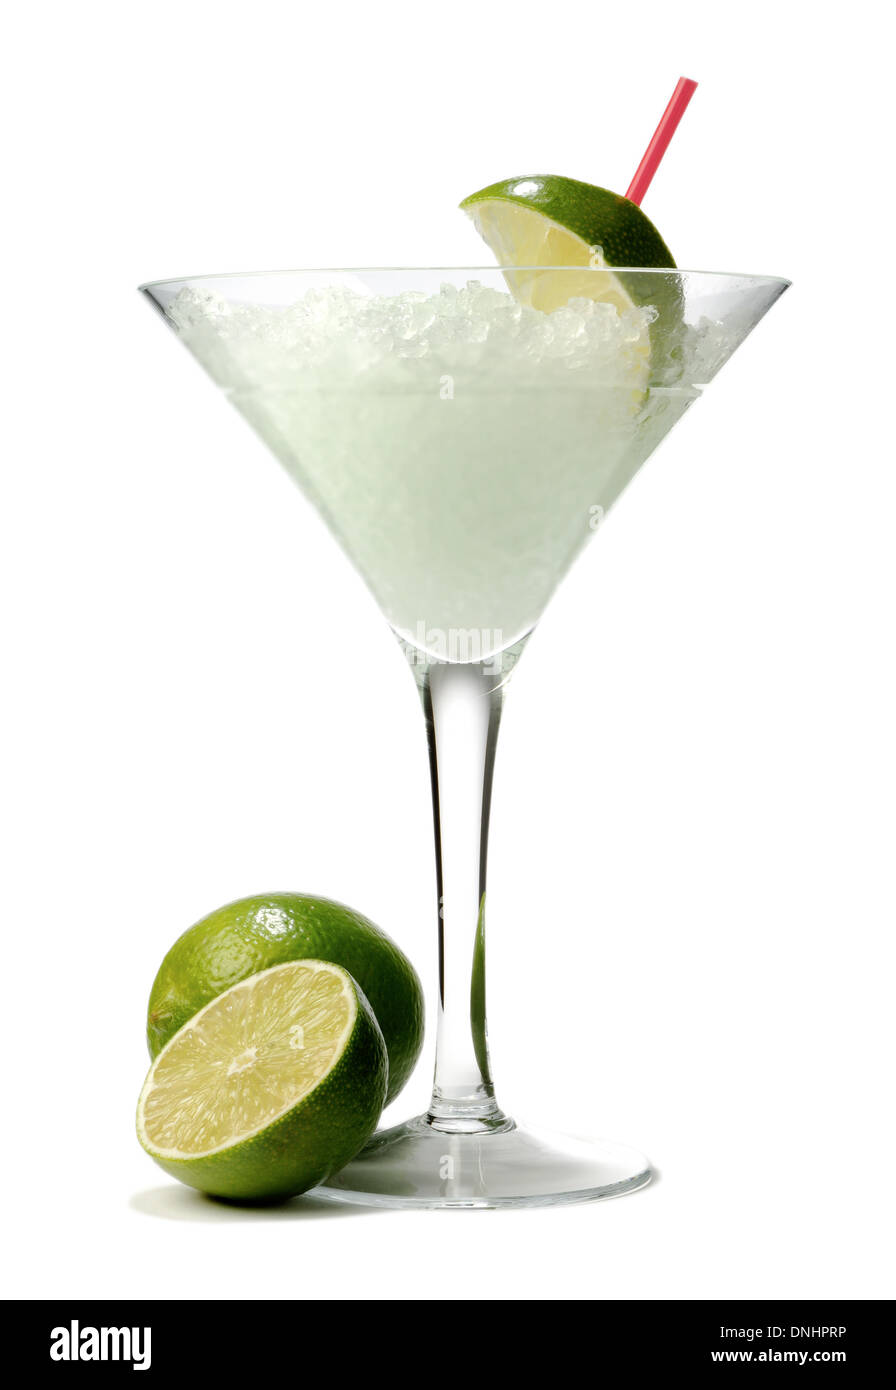 A cocktail drink in a stemmed glass with a green lime garnishes. Stock Photo